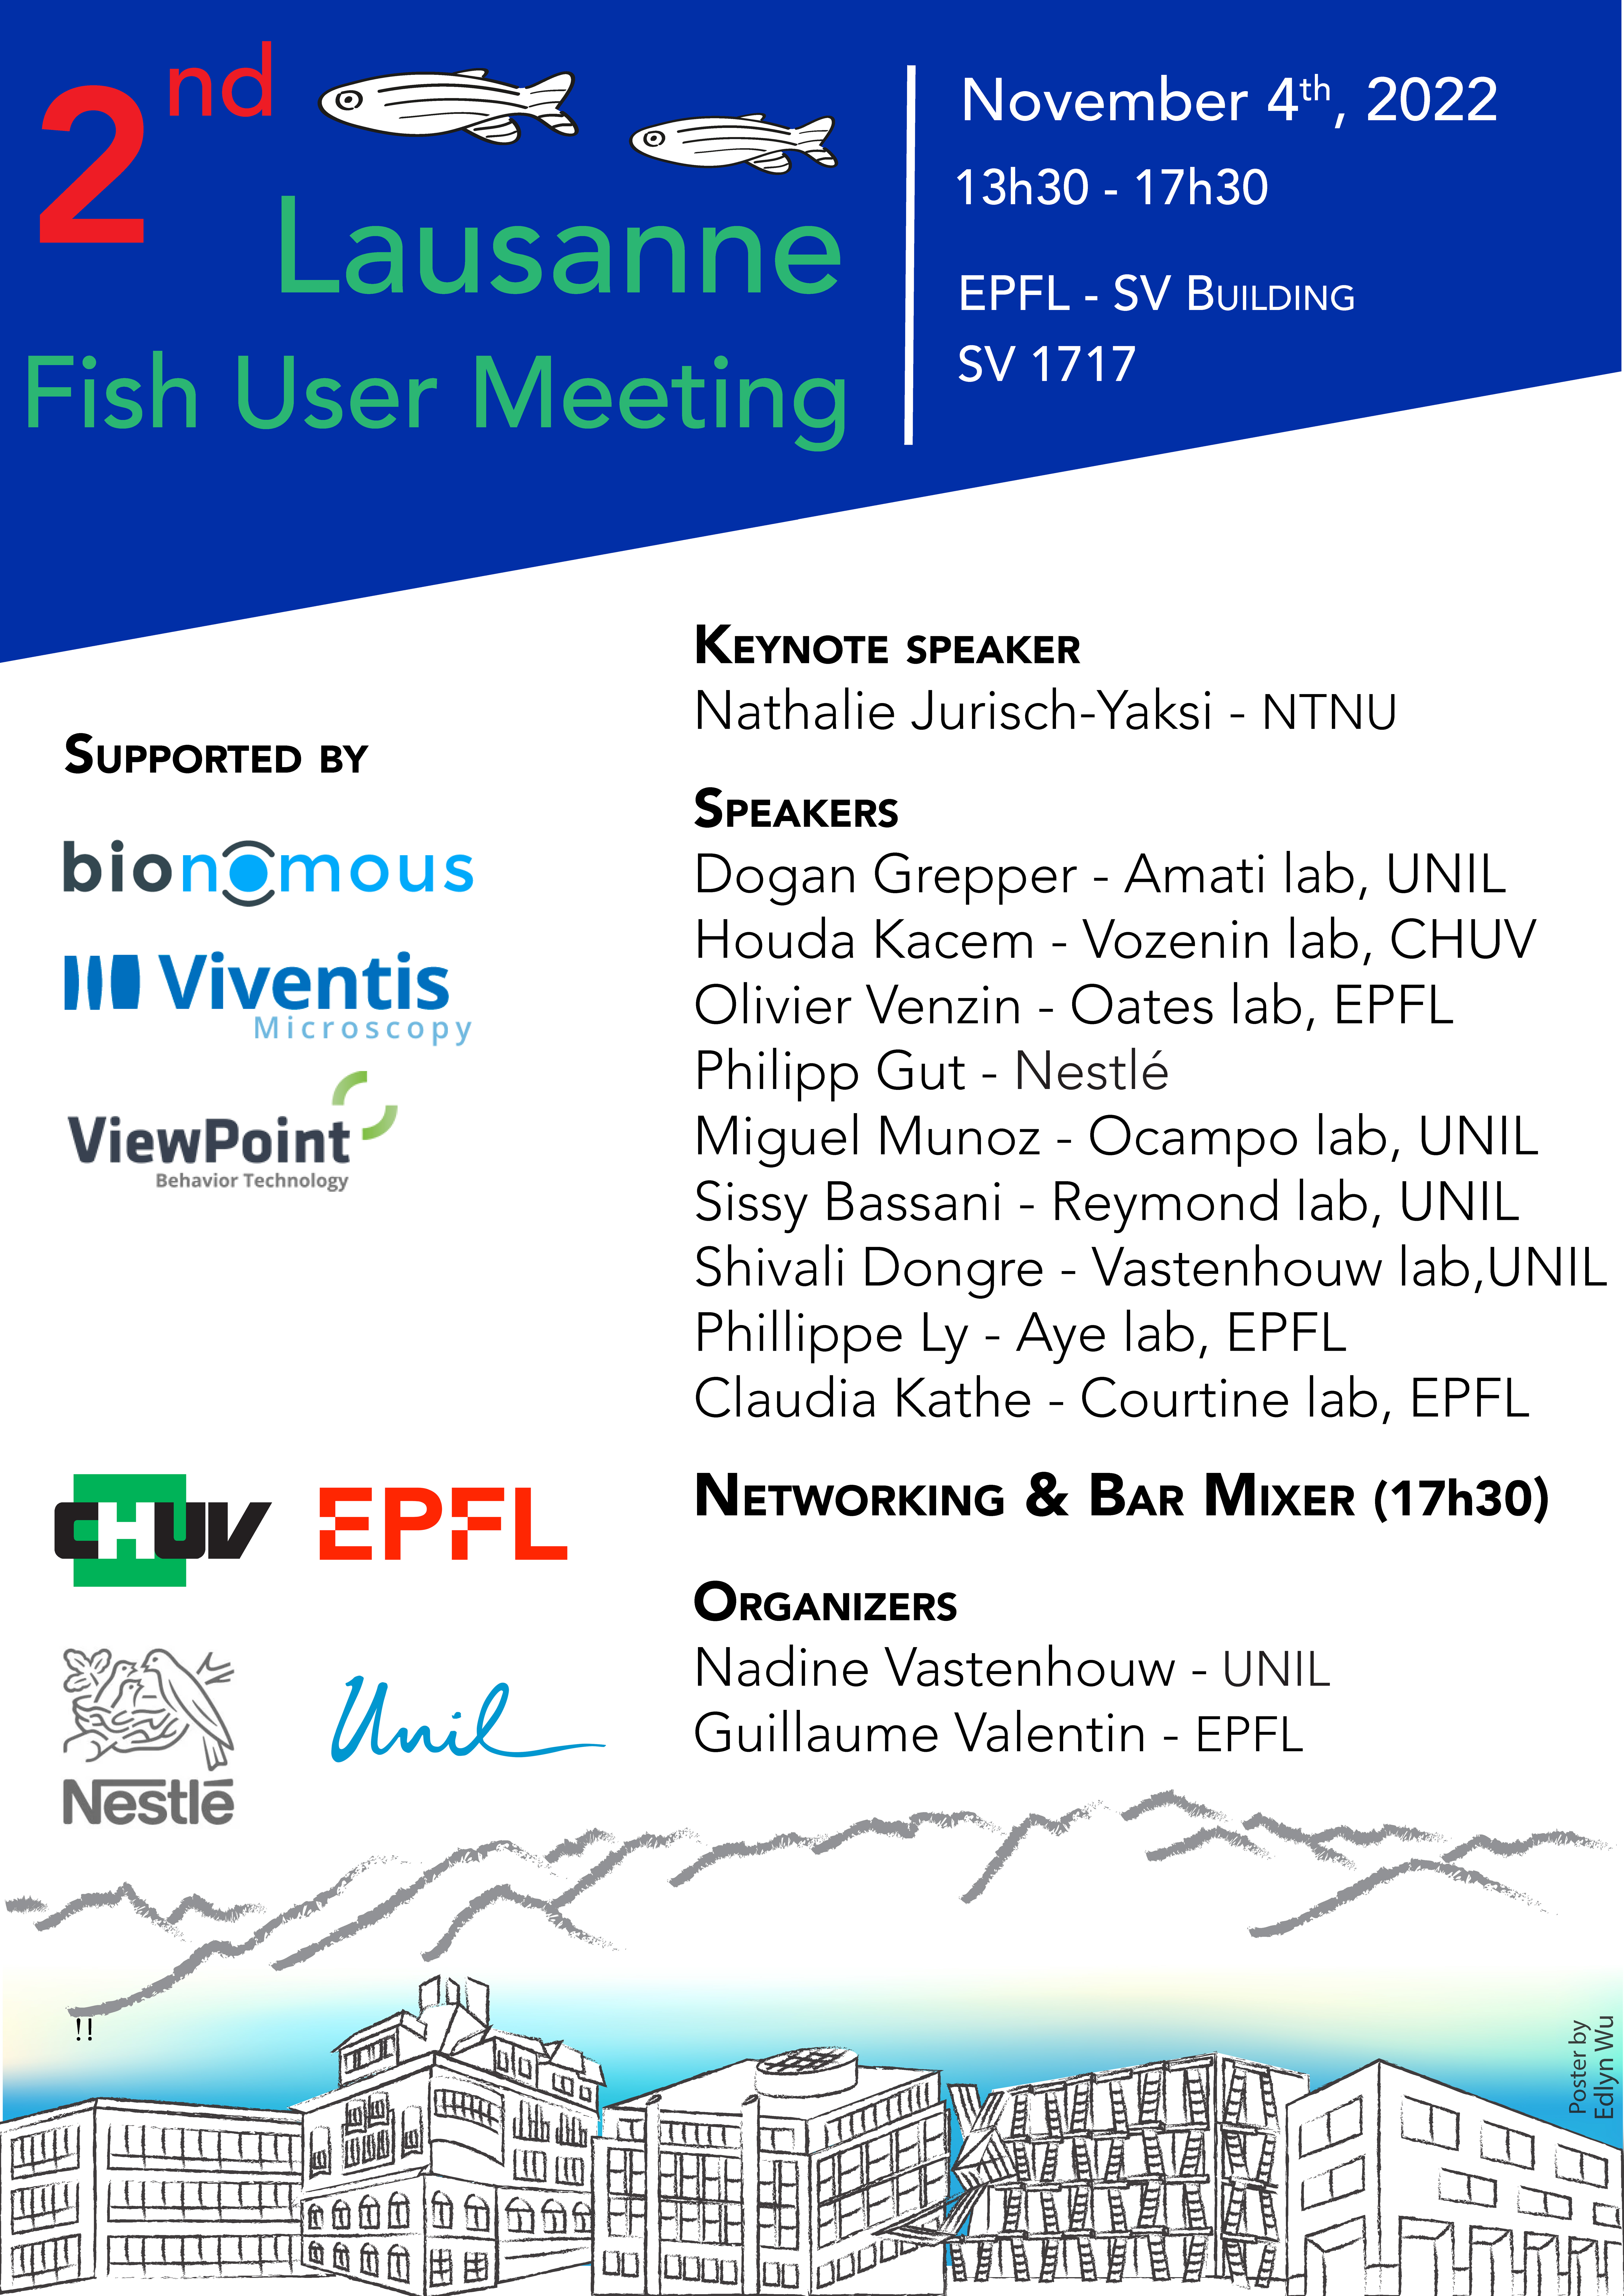 Flyer of the 2nd Lausanne Fish User Meeting